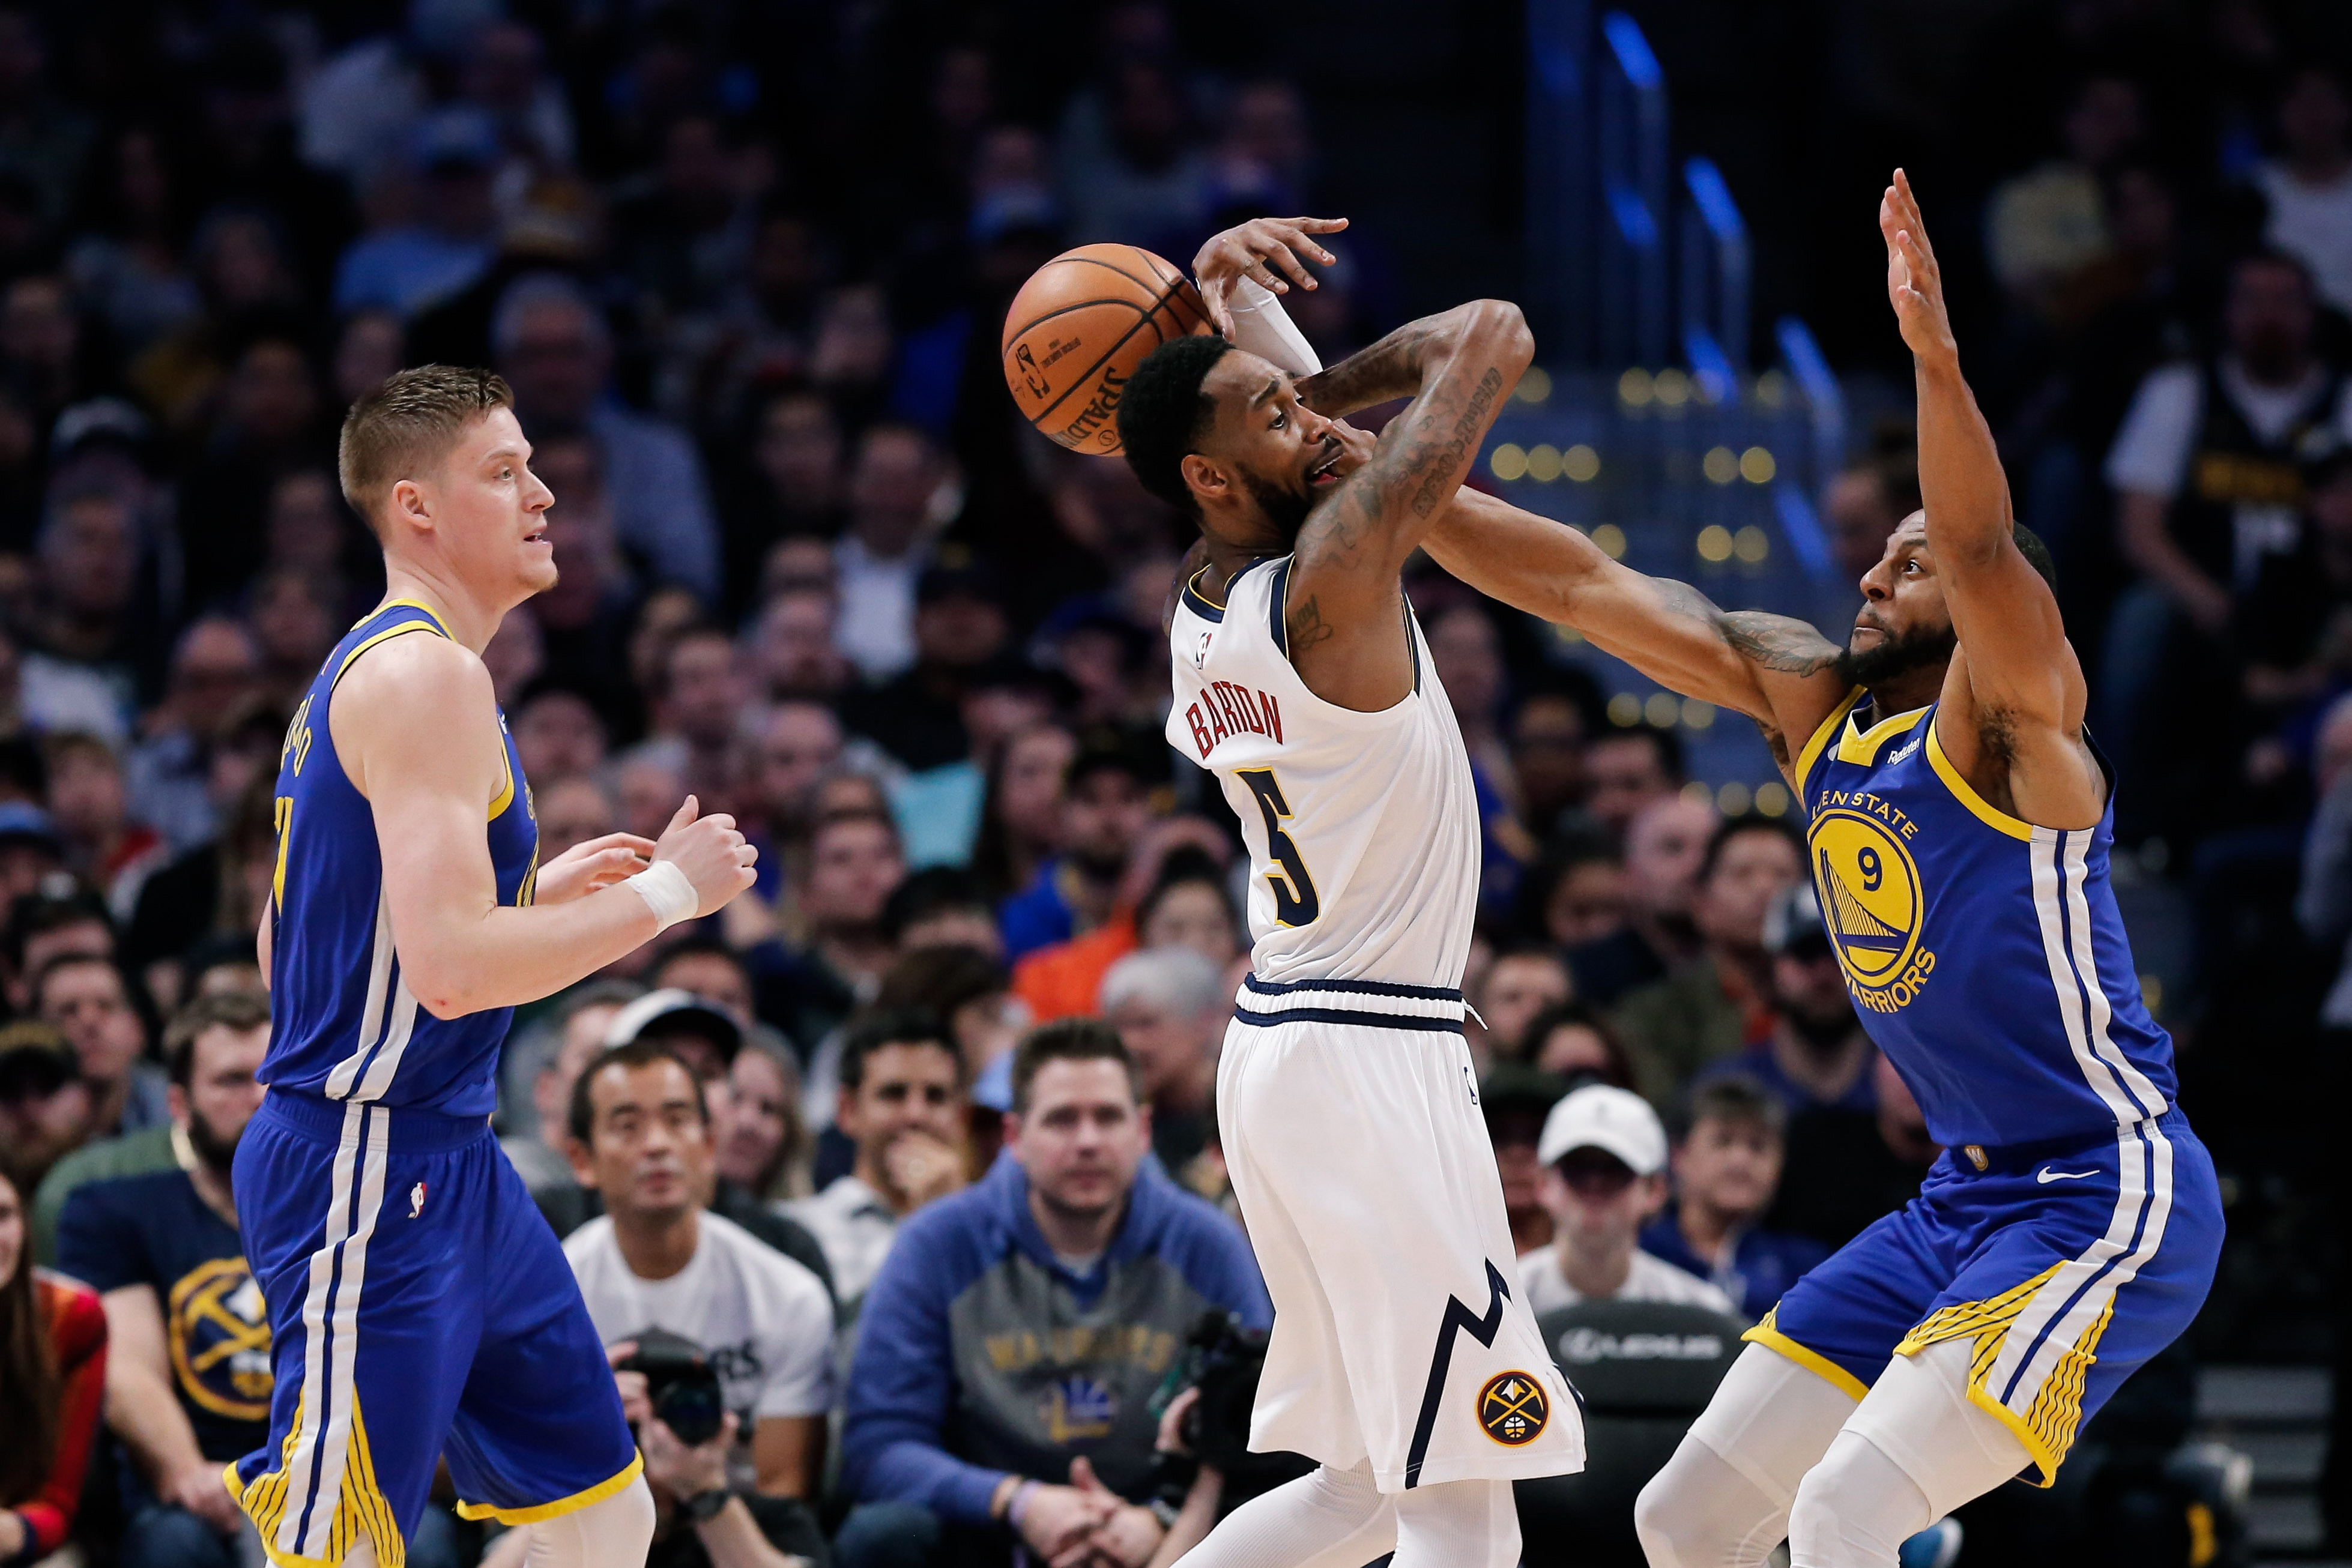 Golden State Warriors guard Andre Iguodala (9) knocks the ball away from Denver Nuggets guard Will Barton (5) as forward Jonas Jerebko (left) looks on in the fourth quarter at the Pepsi Center.